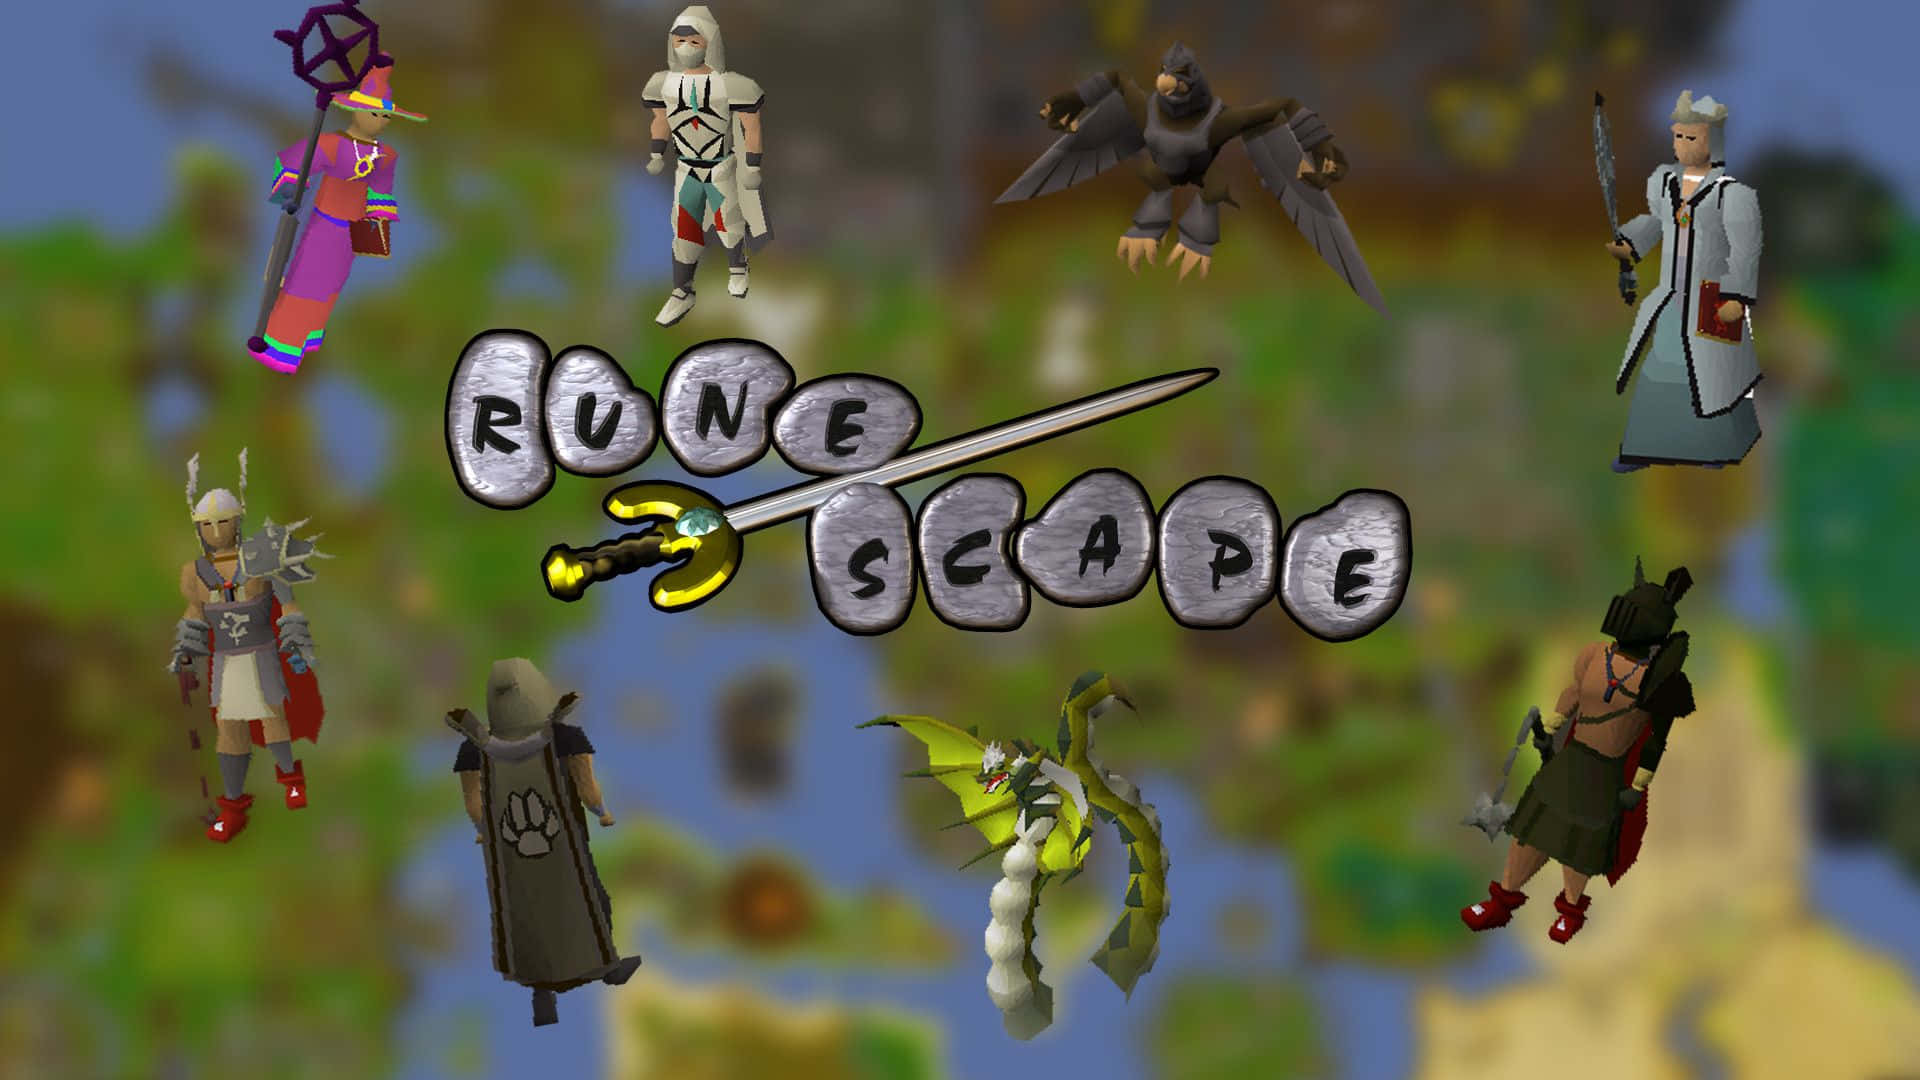 a group of characters with the word roguescape